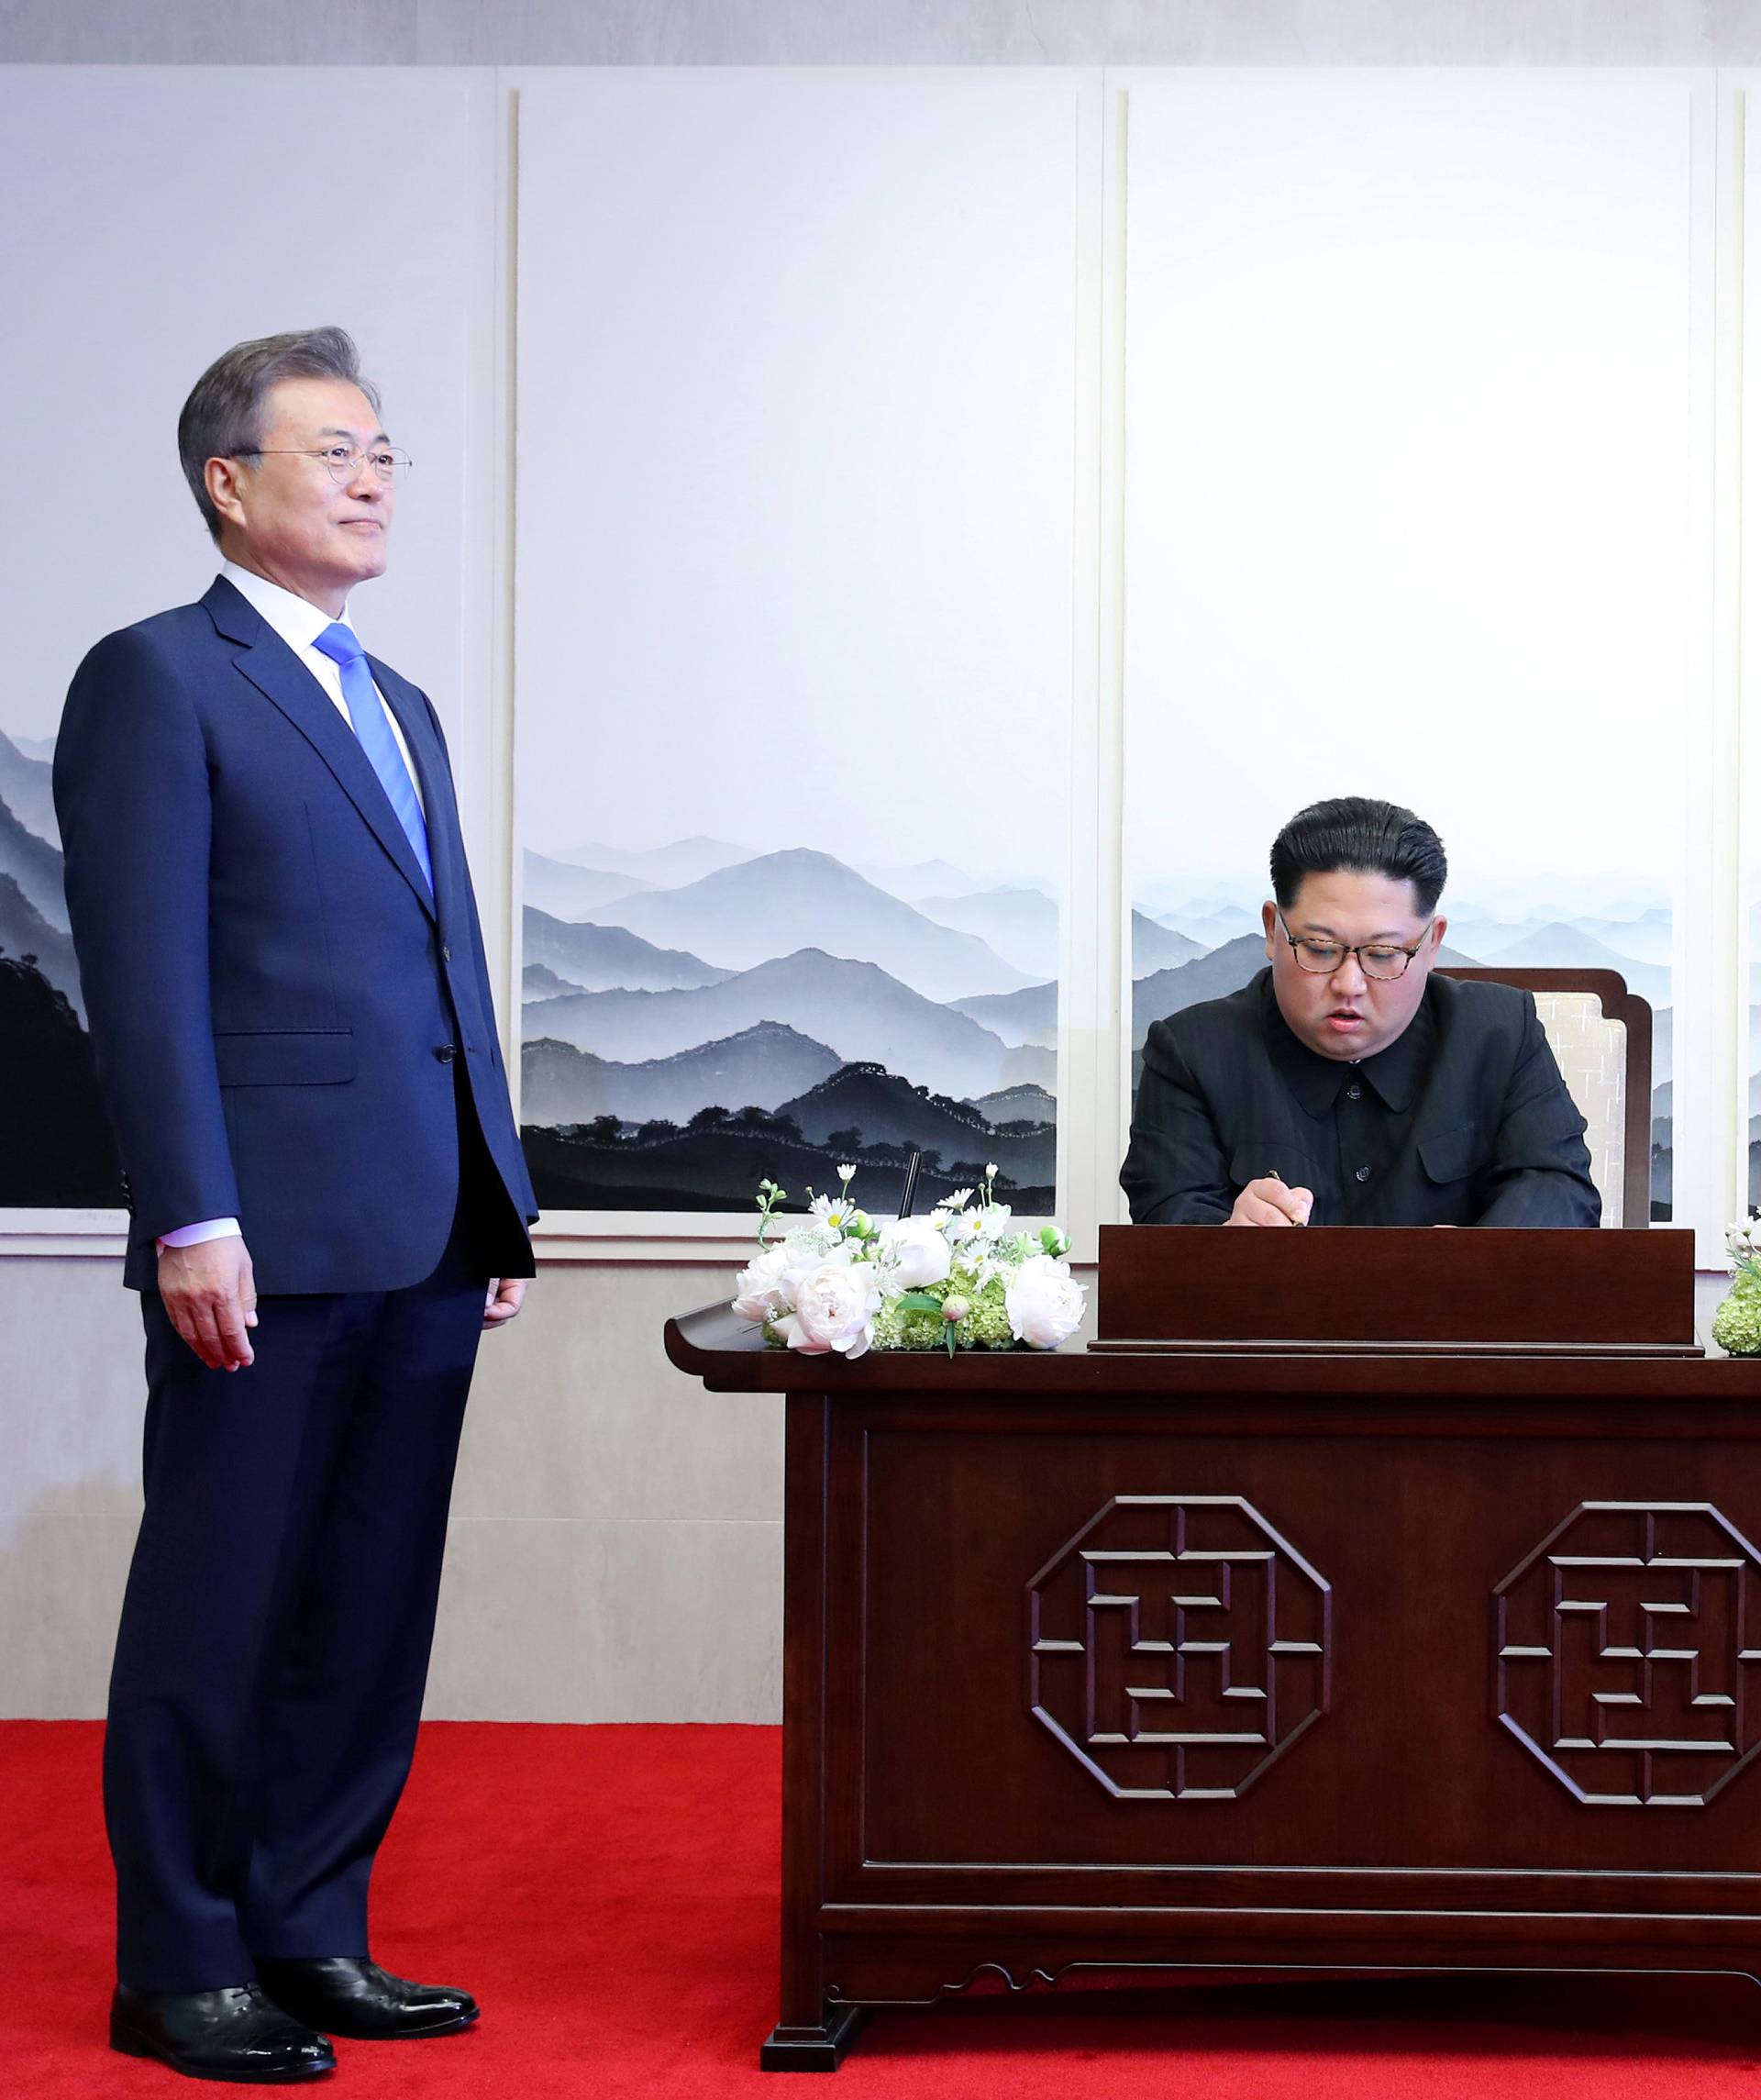 South Korean President Moon Jae-in watches as North Korean leader Kim Jong Un writes in a guestbook during their meeting at the Peace House